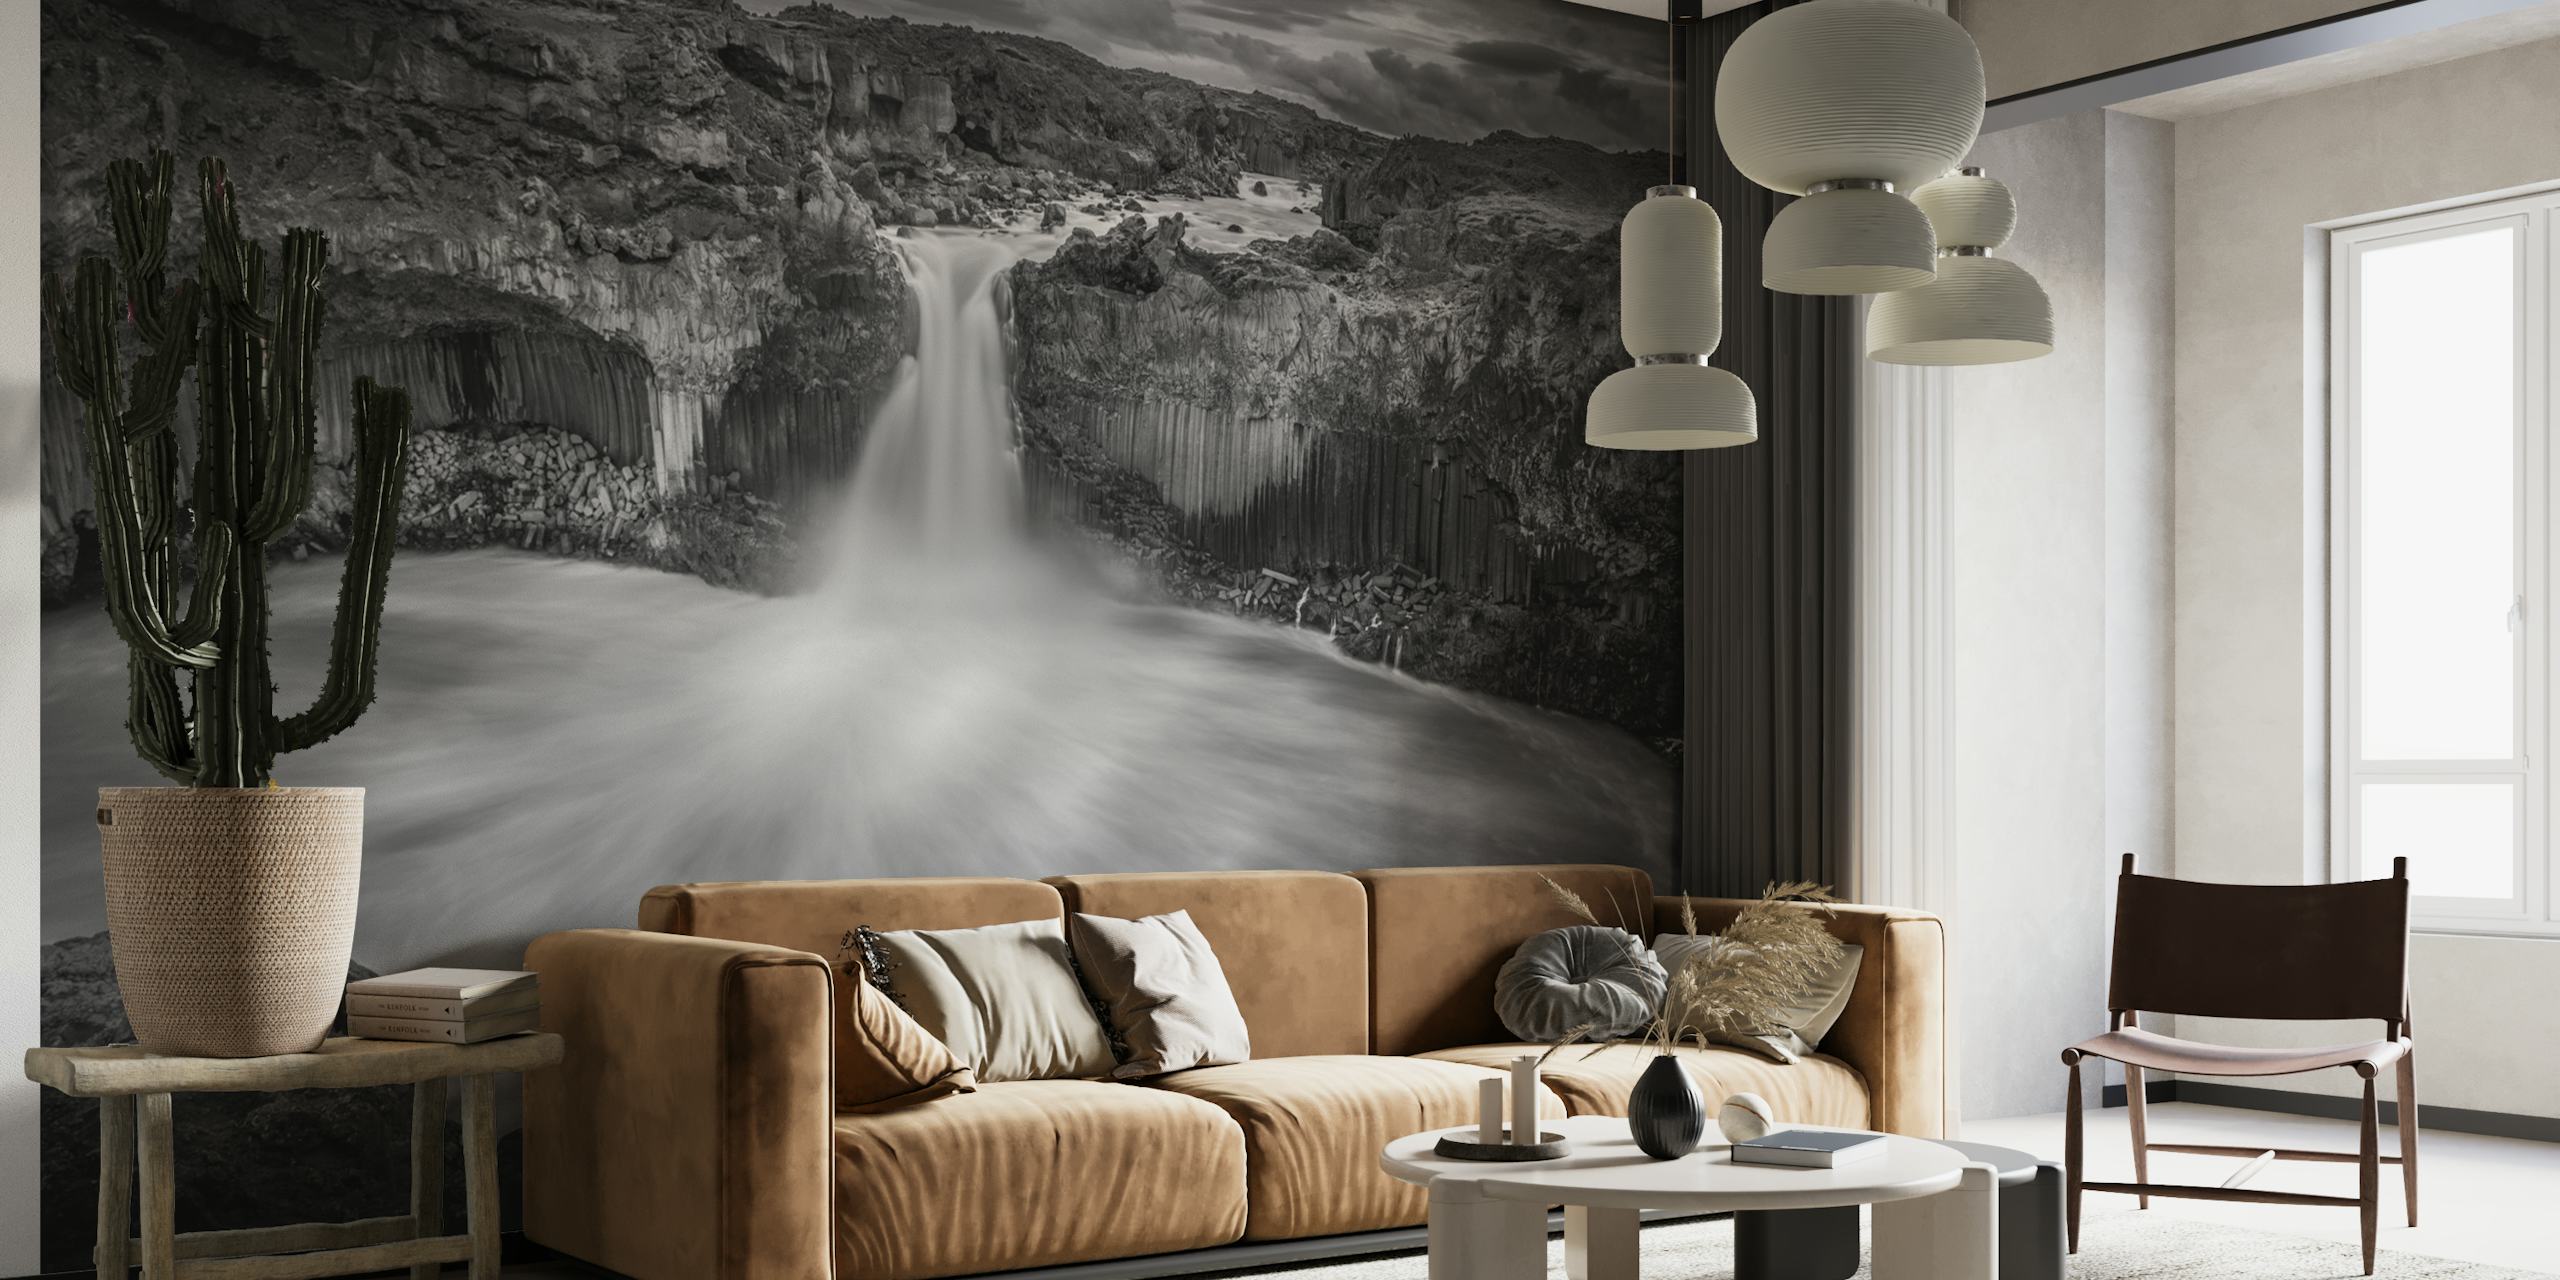 Black and white Icelandic waterfall wall mural displaying dramatic contrasts and nature's grandeur.